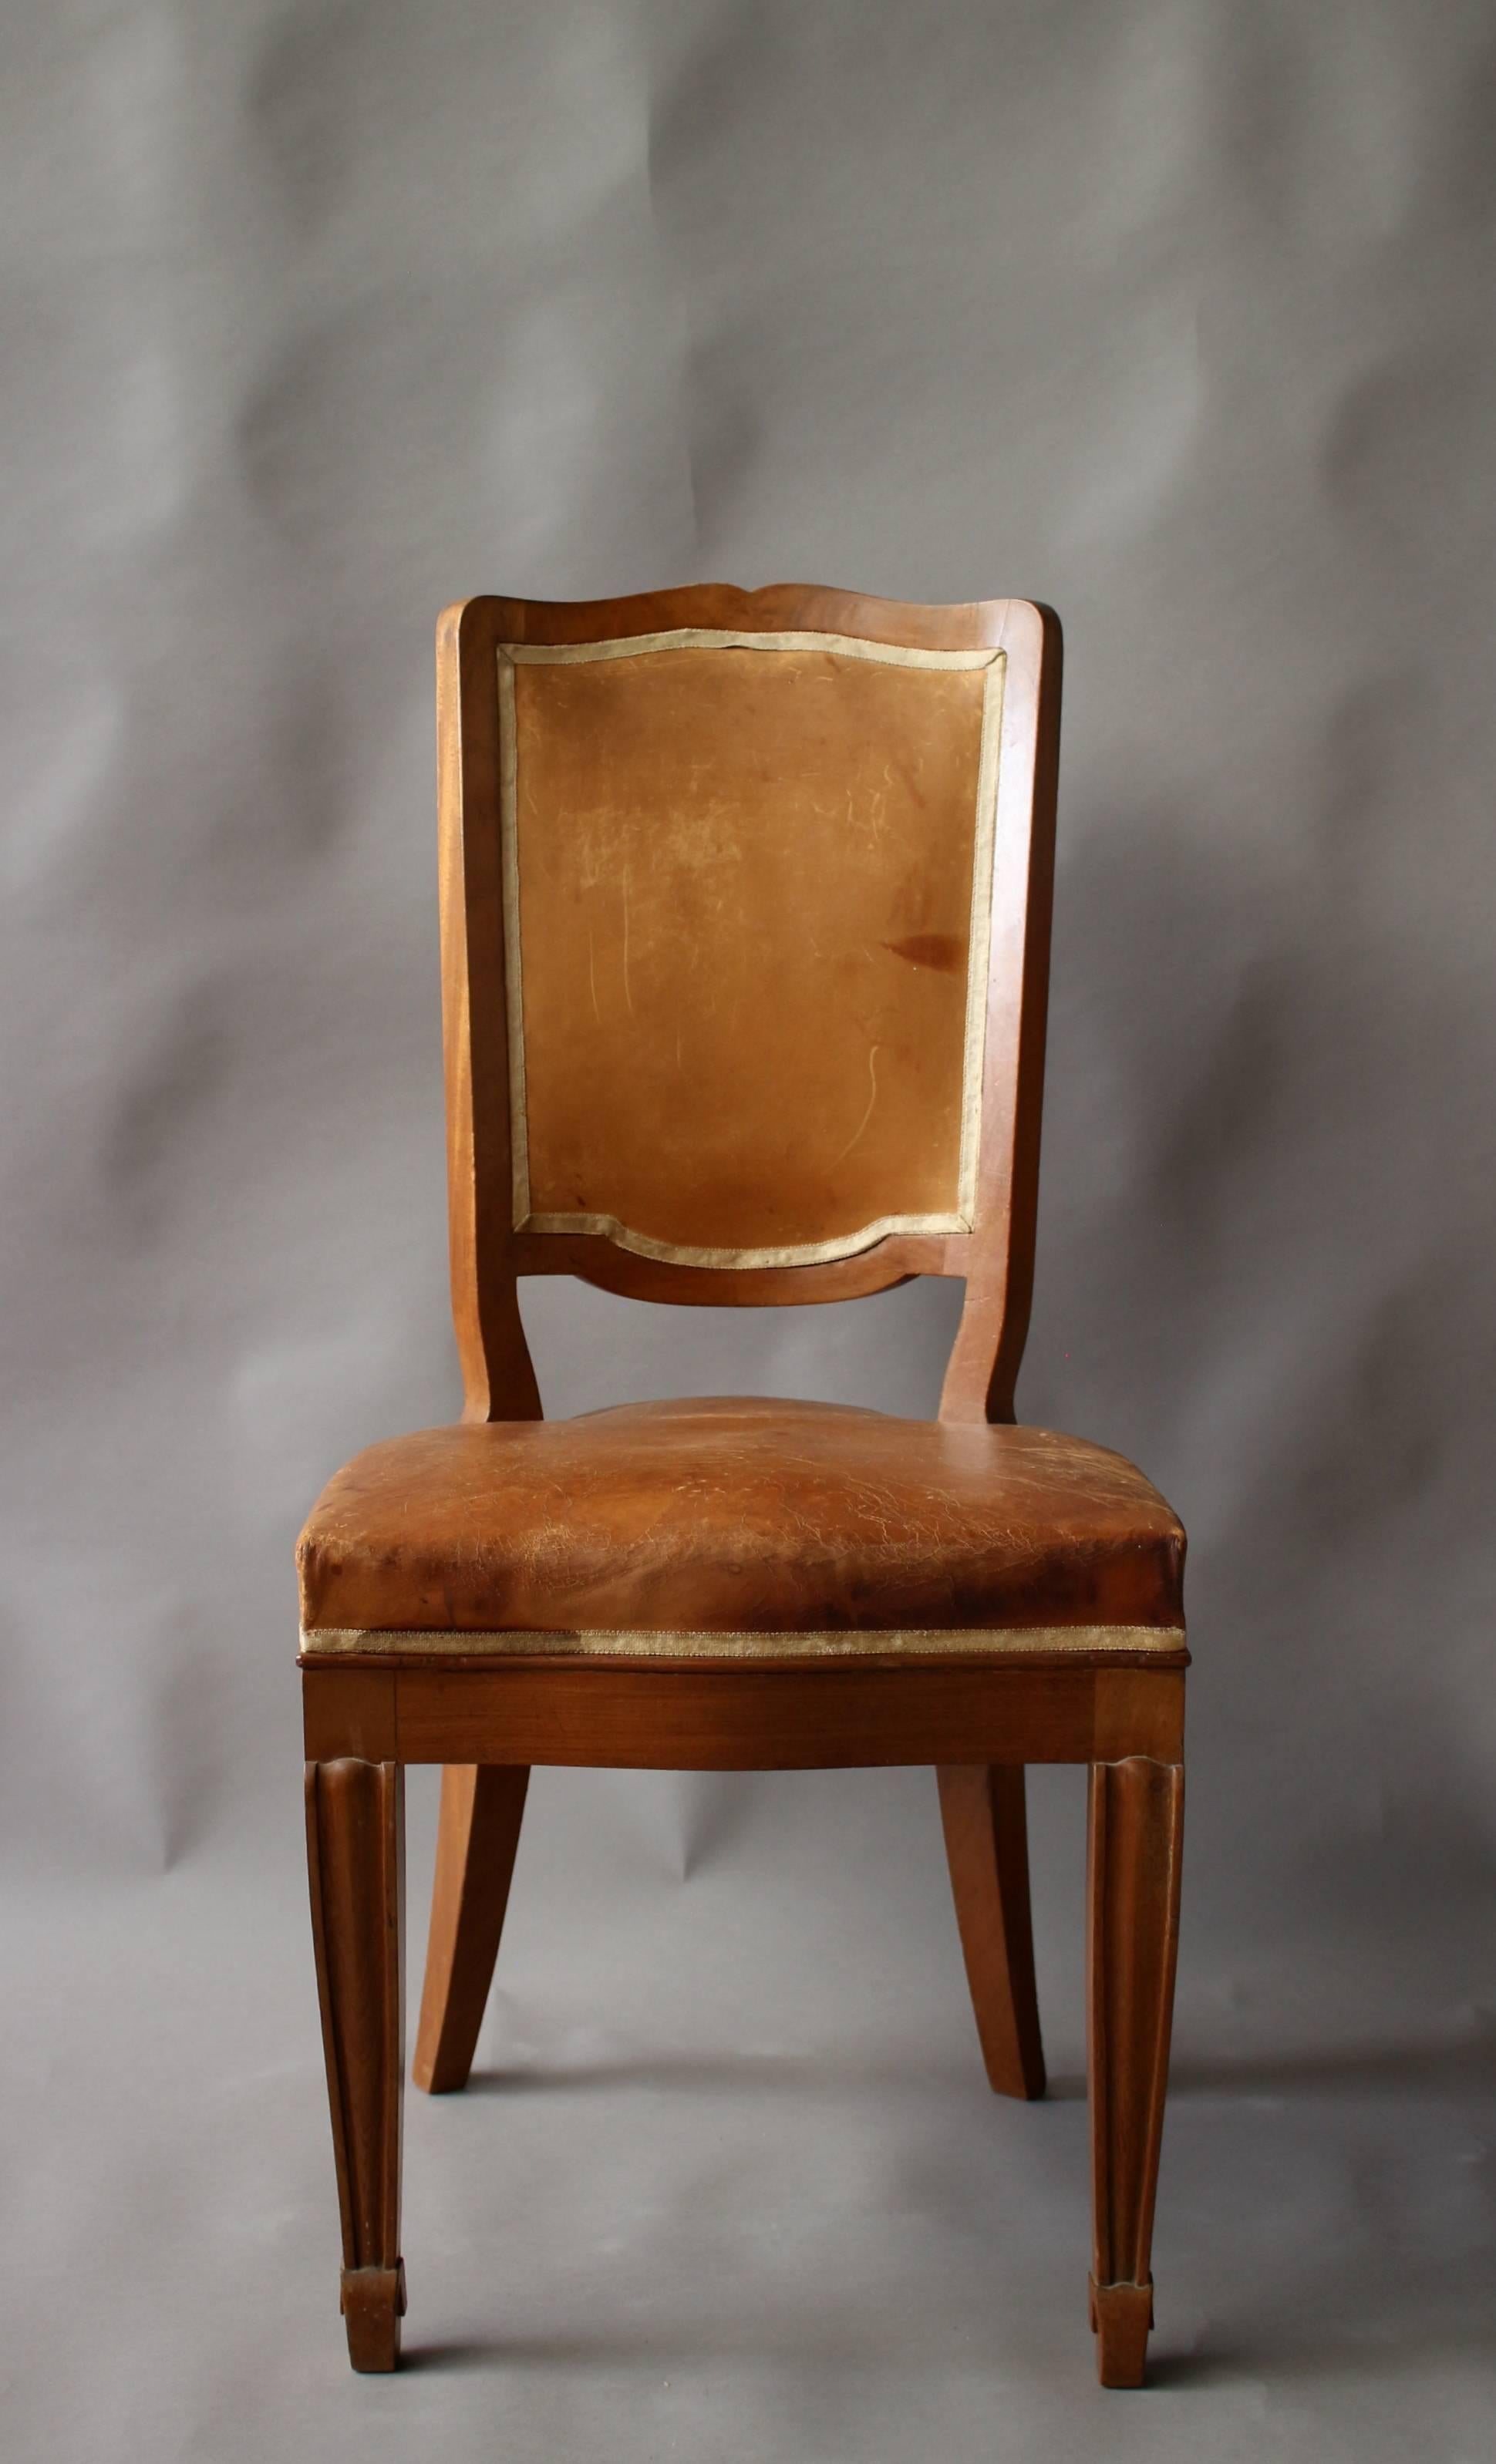 A Set of 12 Fine French Art Deco Mahogany Dining Chairs in the Manner of Arbus 1